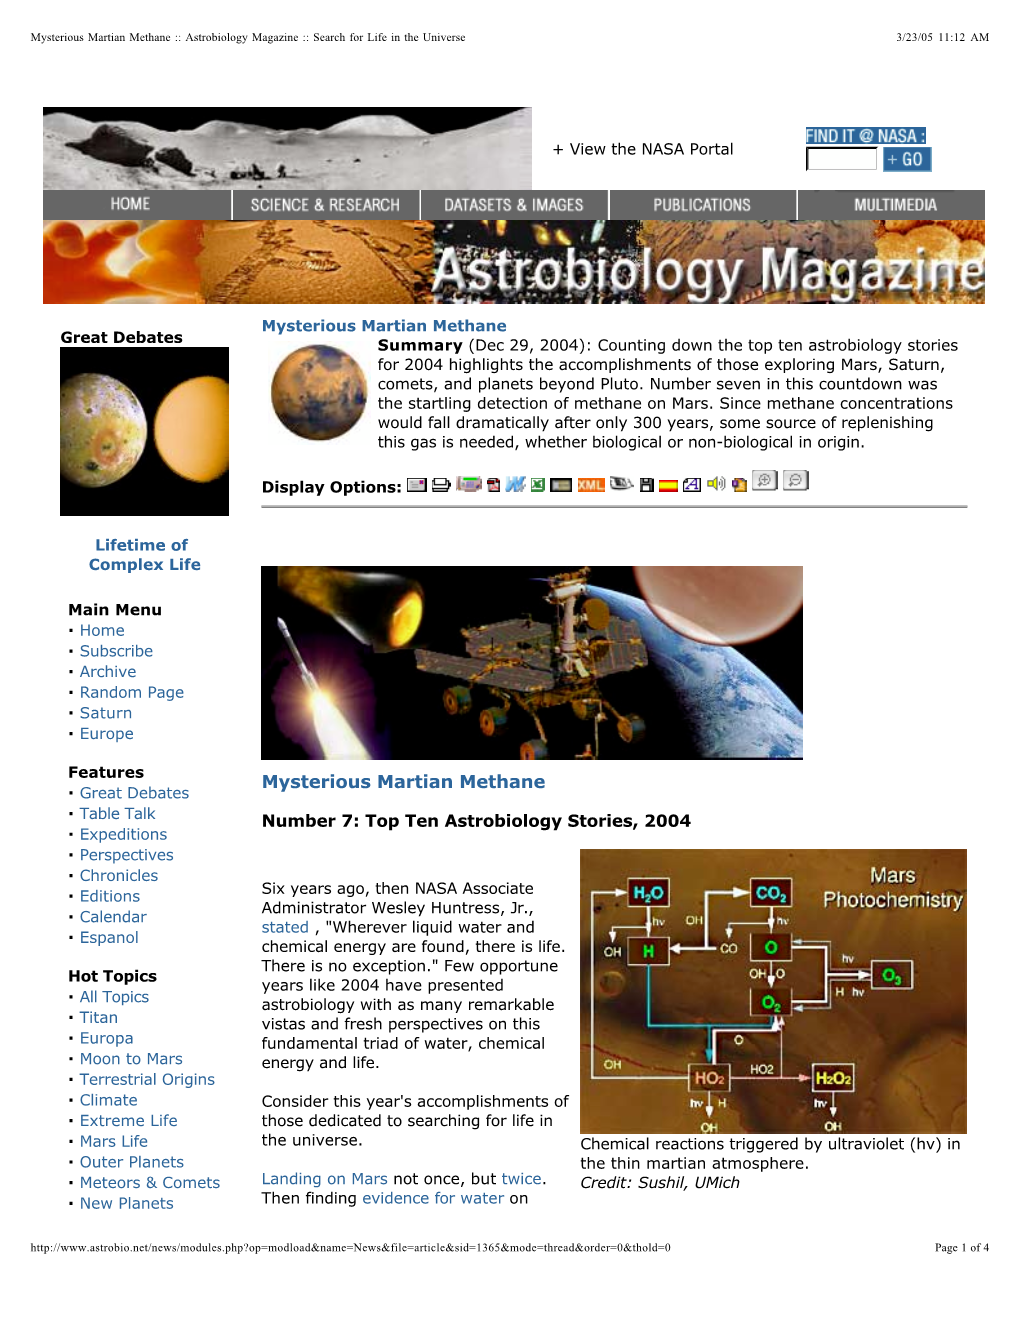 Mysterious Martian Methane :: Astrobiology Magazine :: Search for Life in the Universe 3/23/05 11:12 AM